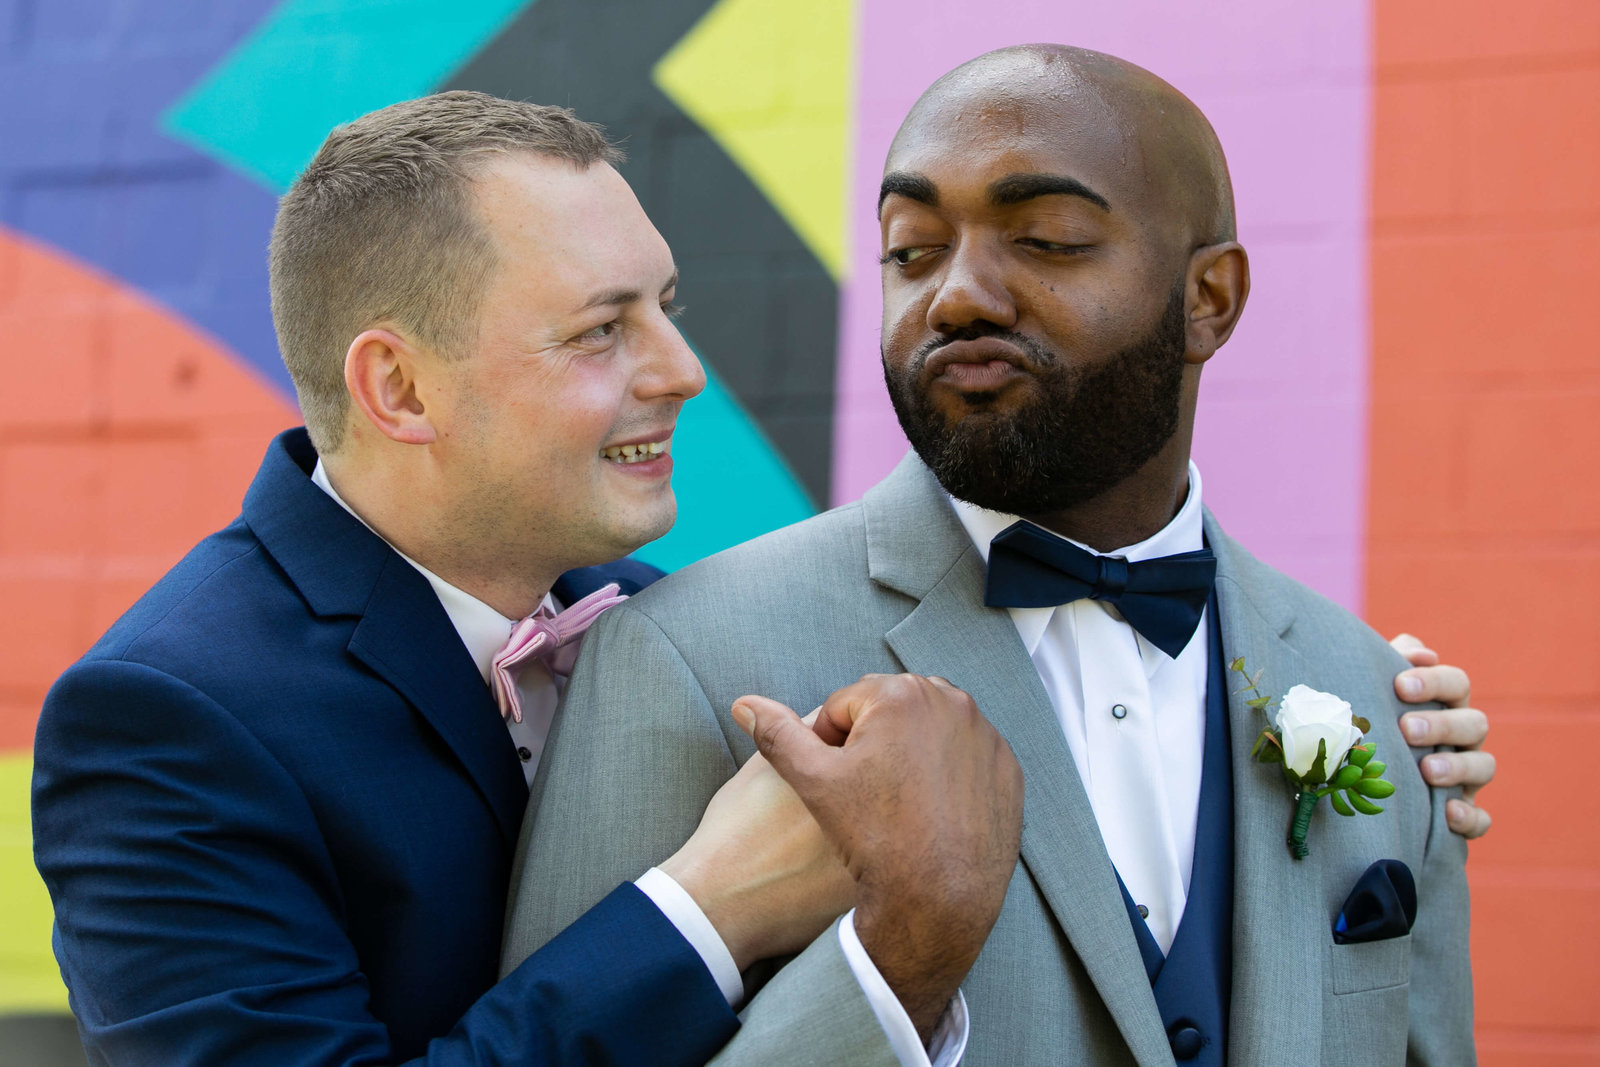 Grooms in matching grey and navy blue tuxes